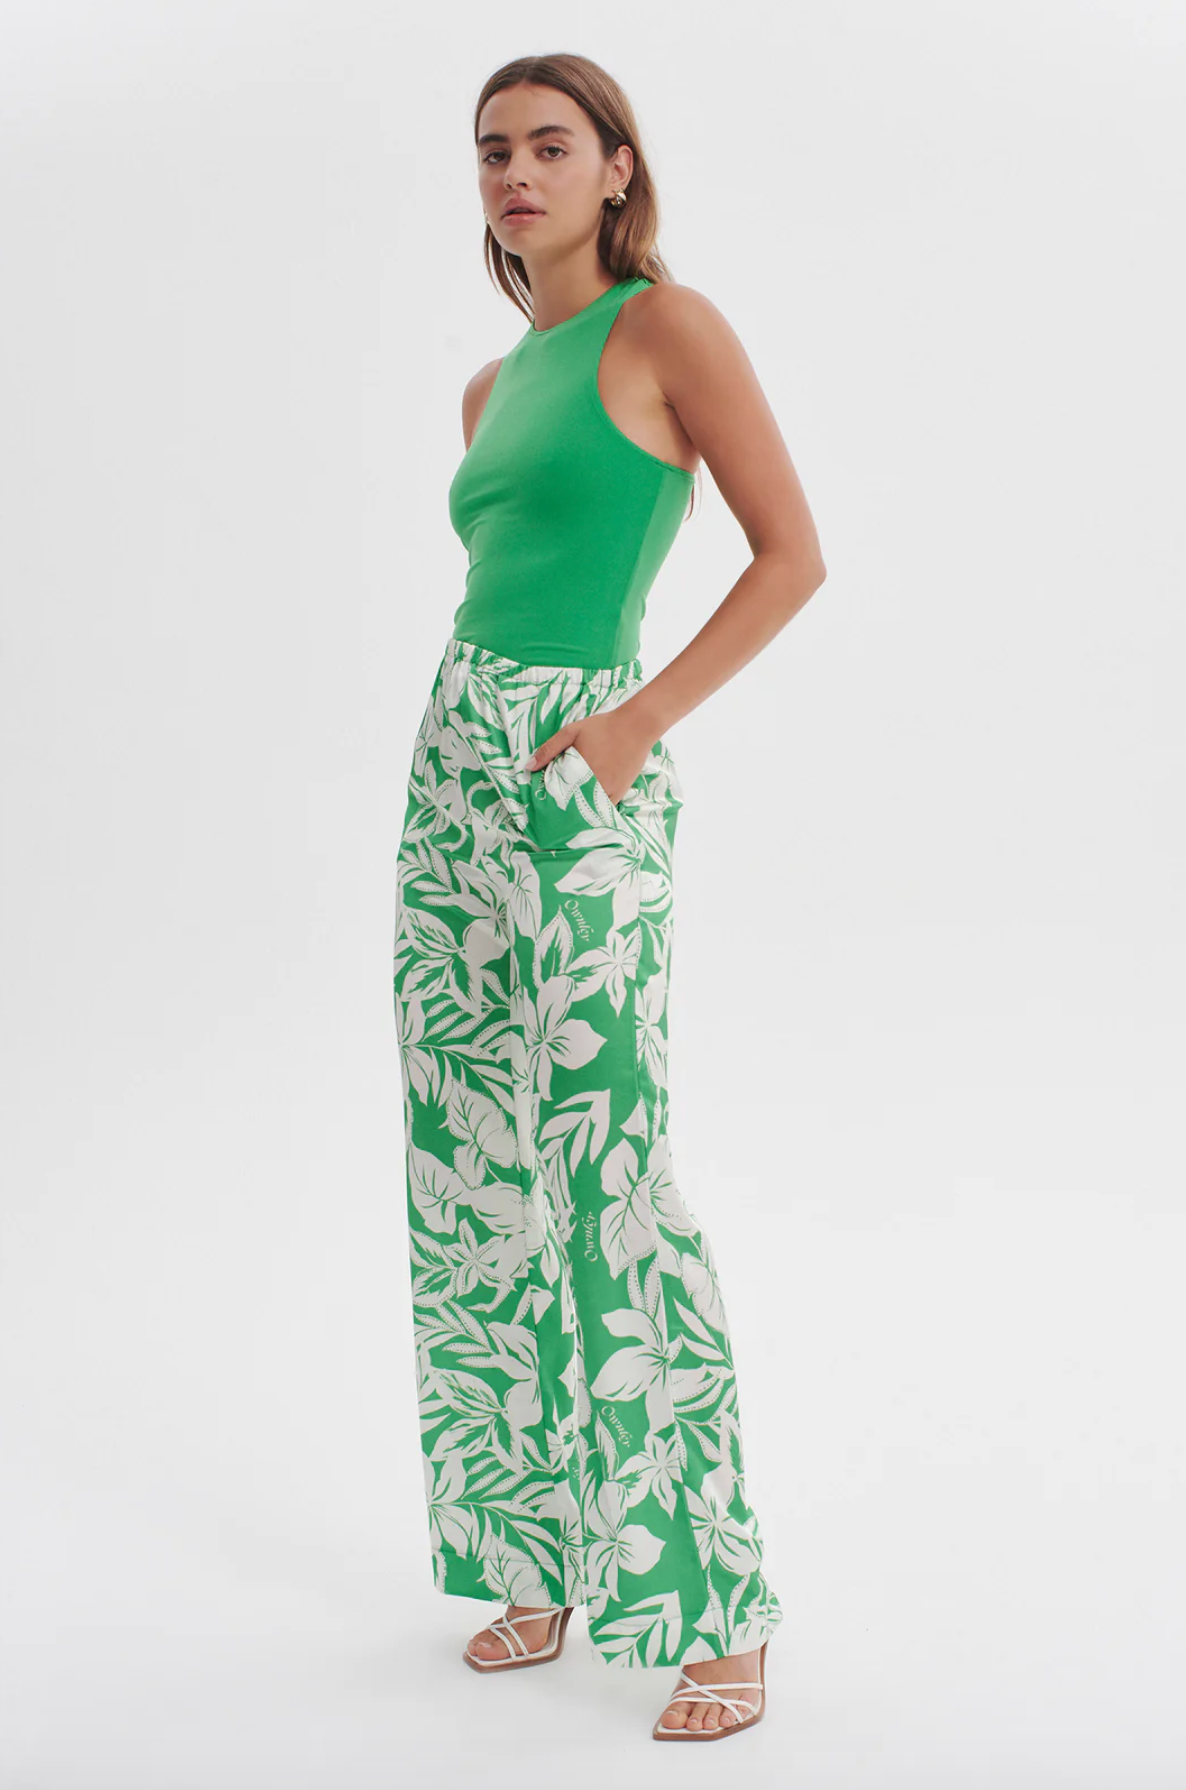 PINA RELAXED PANT - GREEN PALM